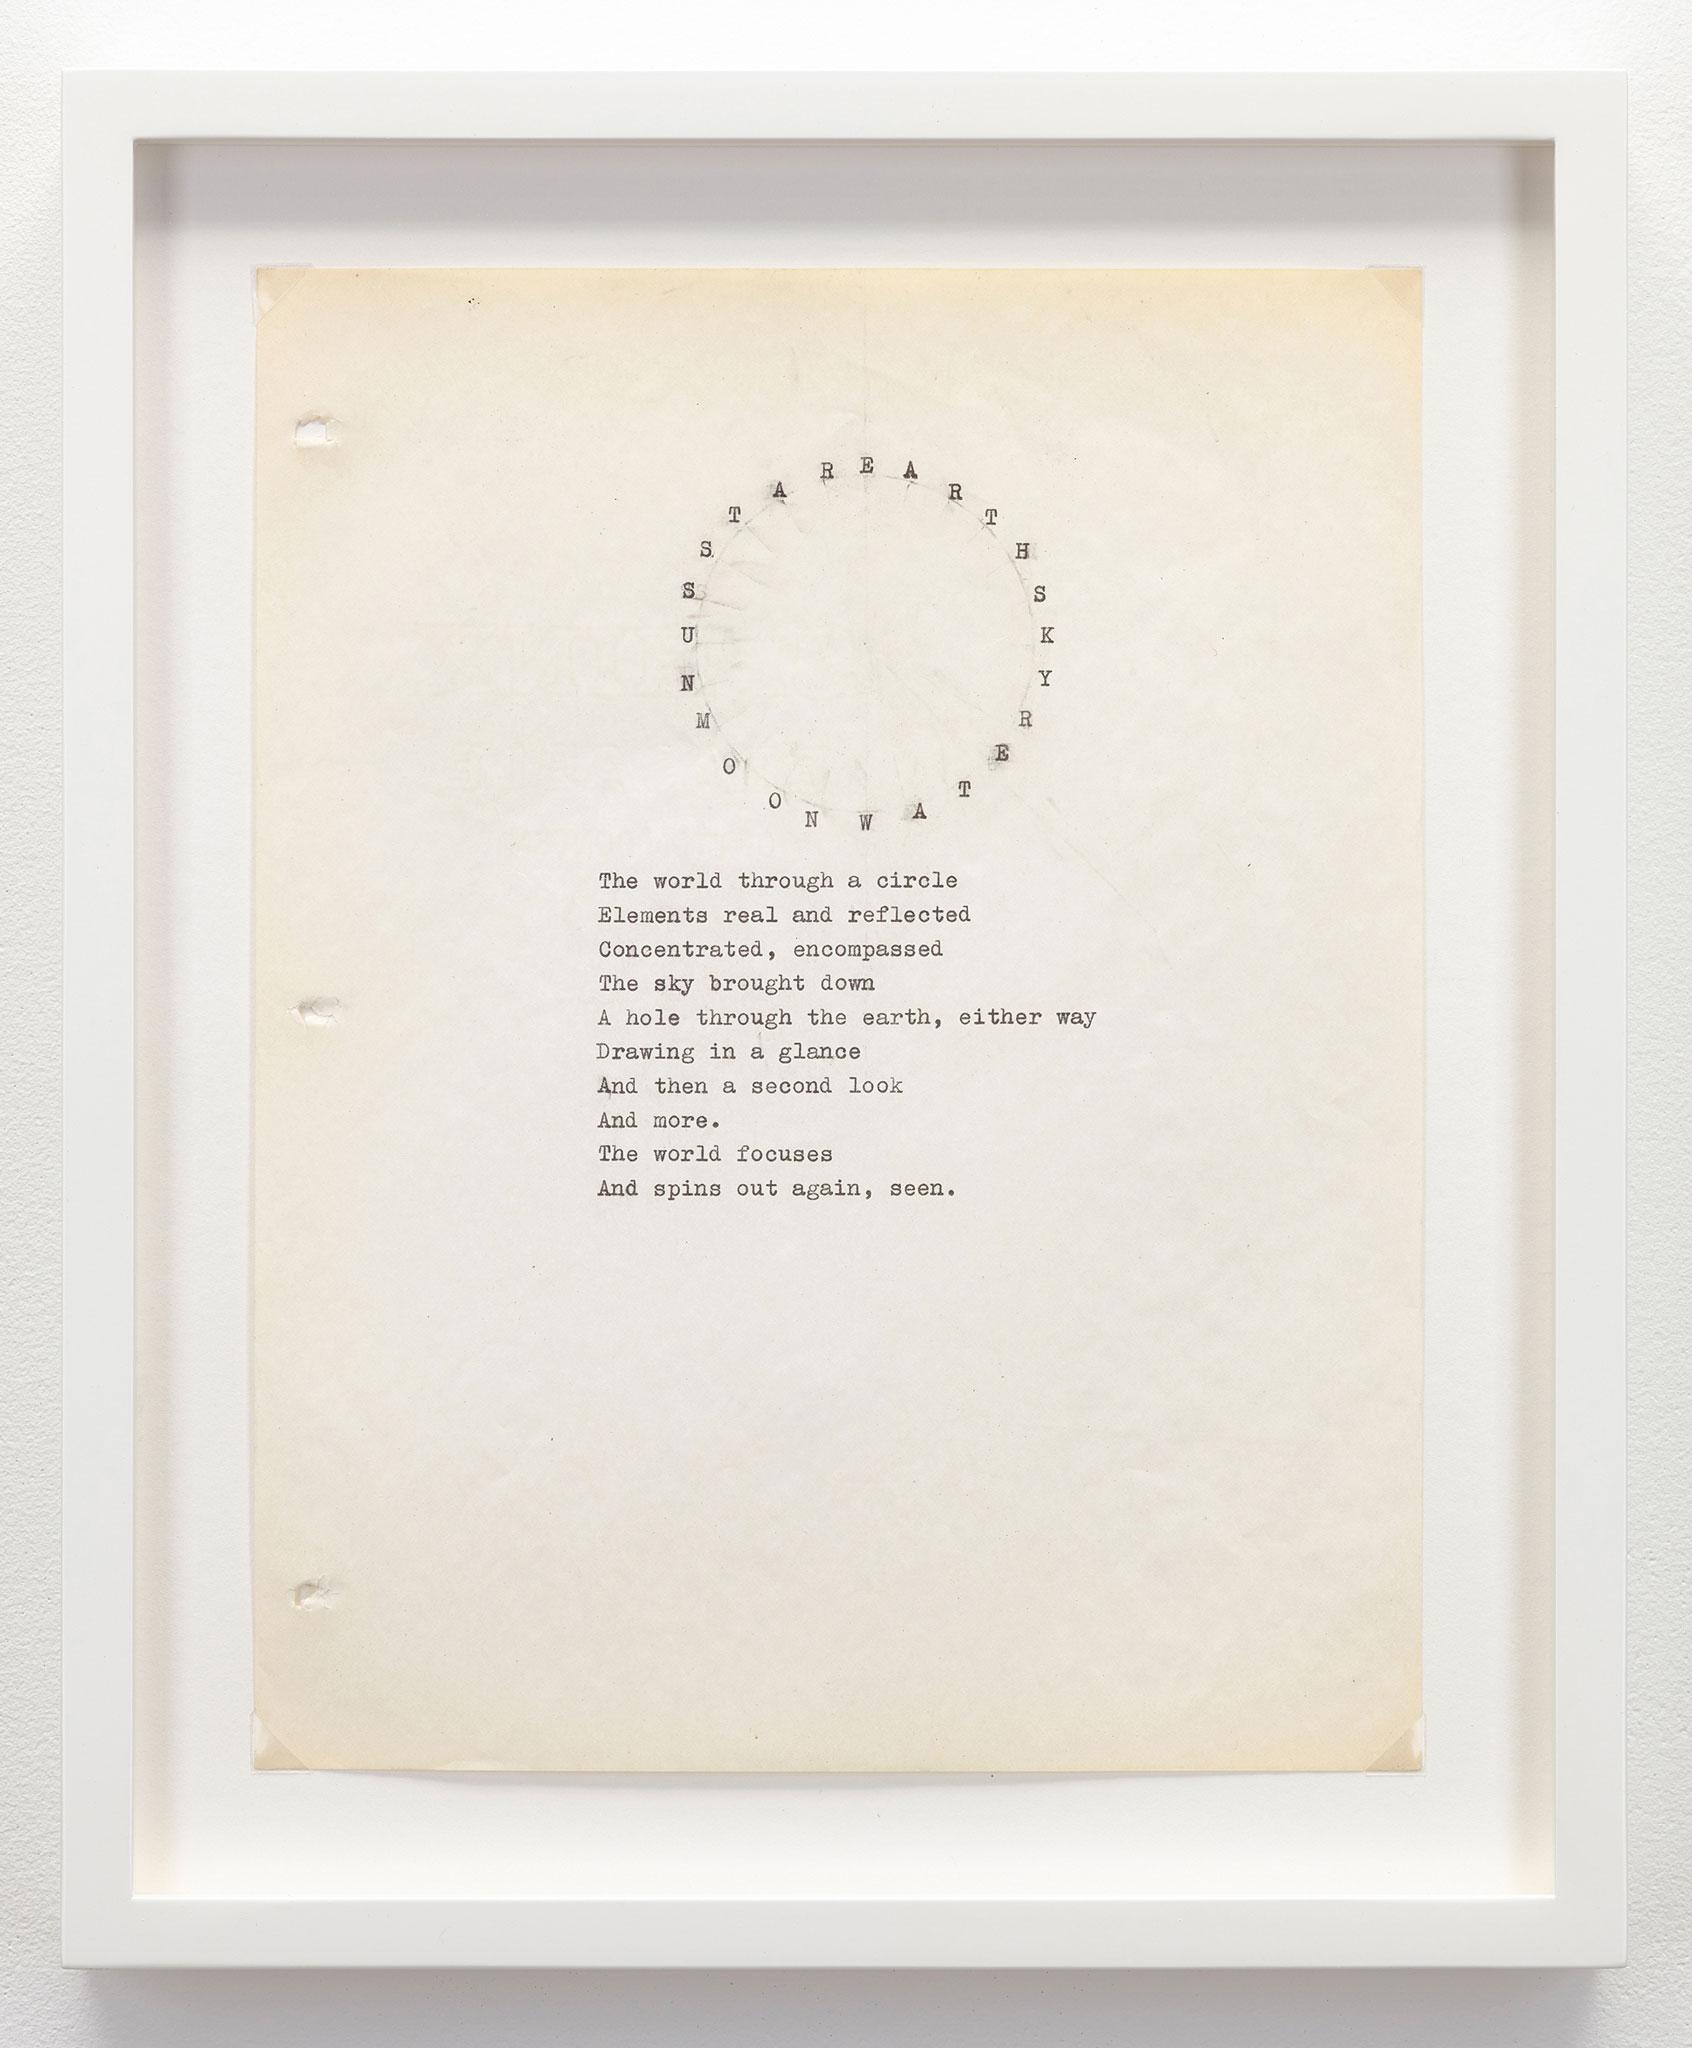 framed typewritten paper with words in a circle shape above a paragraph poem